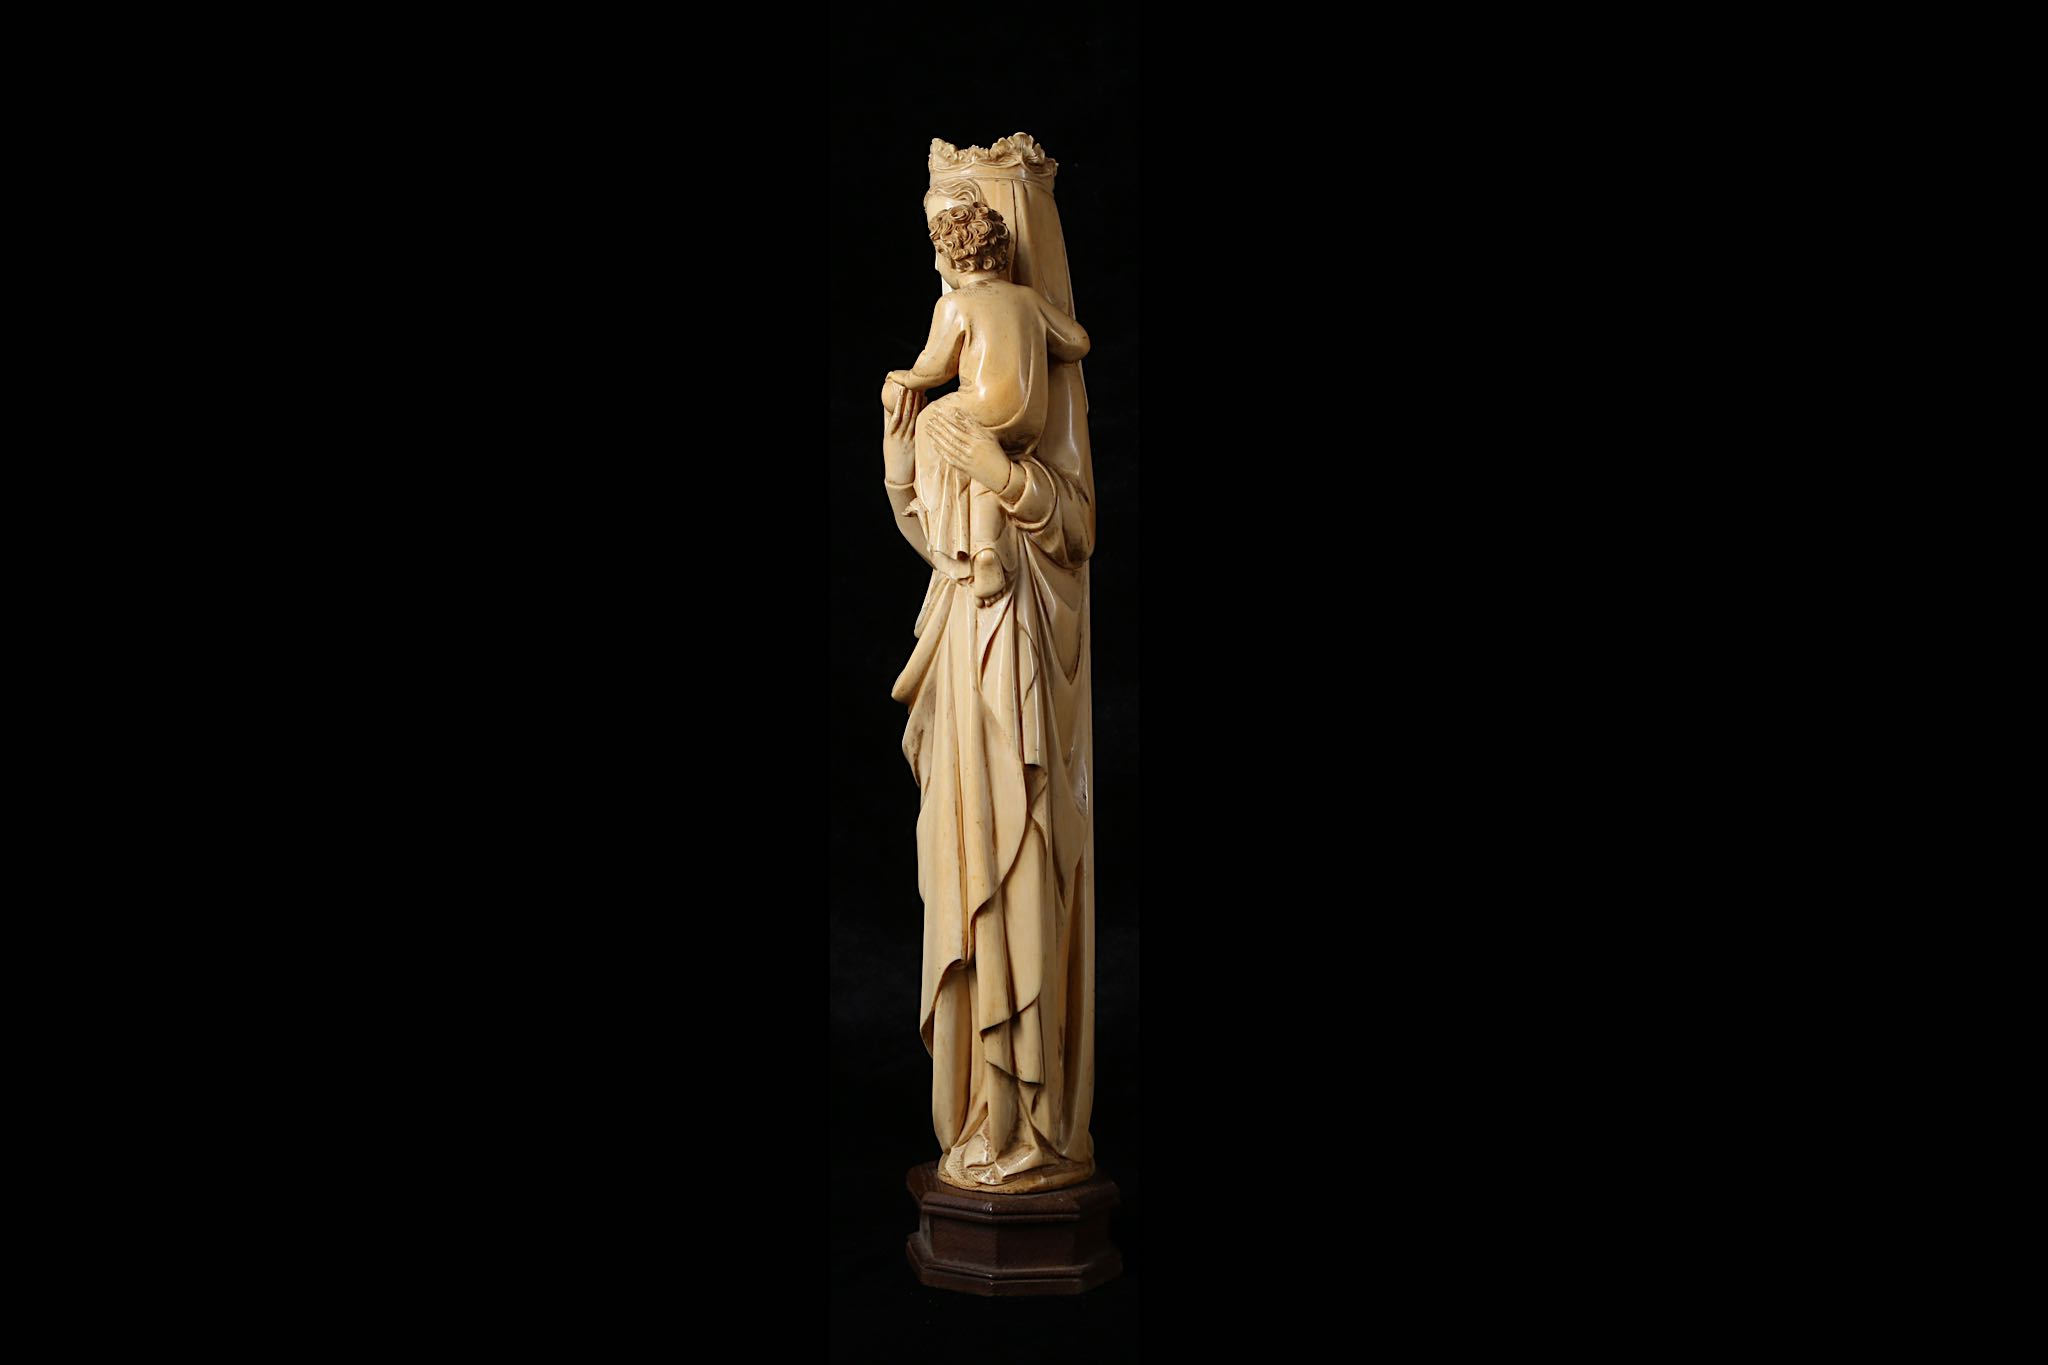 A LARGE 19TH CENTURY FRENCH (DIEPPE) CARVED IVORY FIGURE OF THE VIRGIN AND CHILD IN THE GOTHIC STYLE - Image 2 of 5